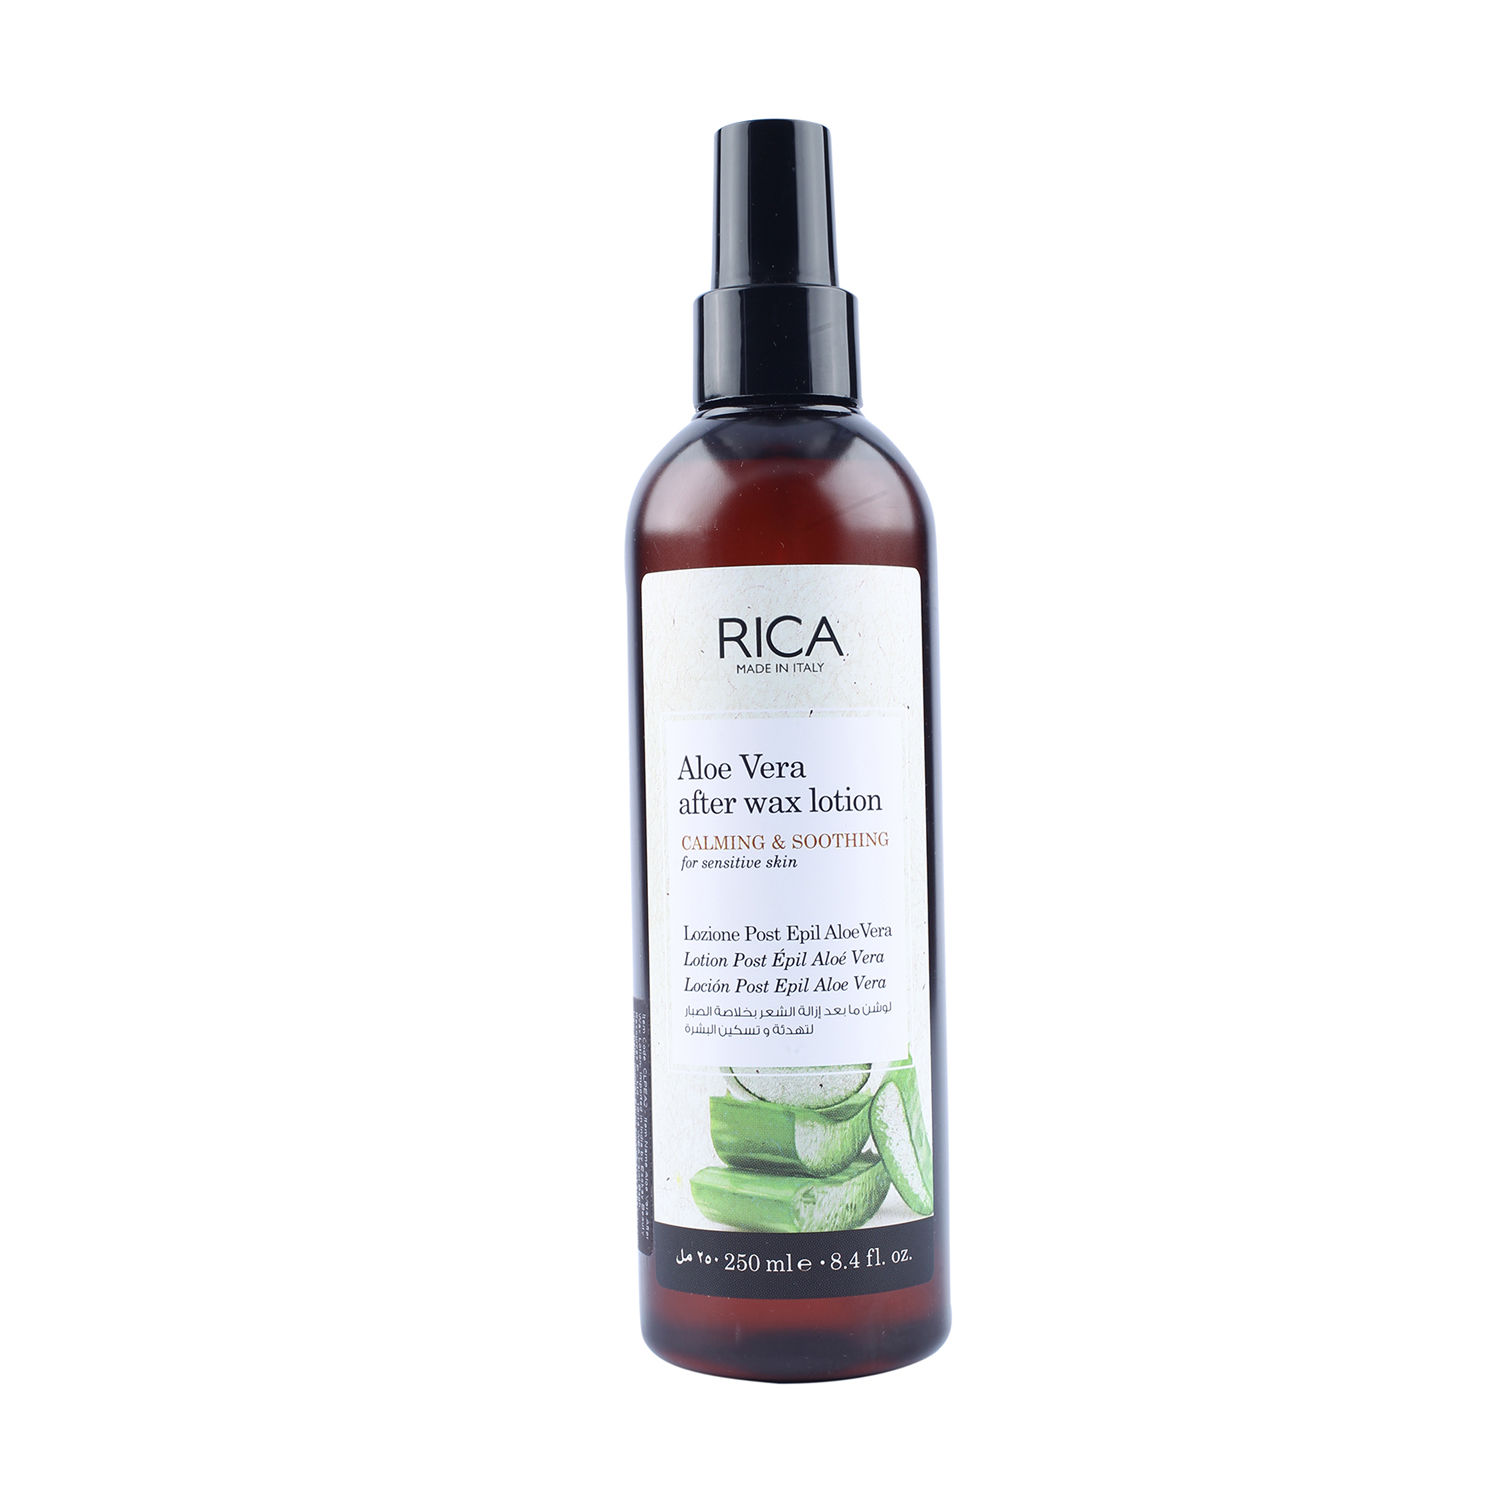 Rica Aloe Vera After Wax Claming & Smoothing Lotion